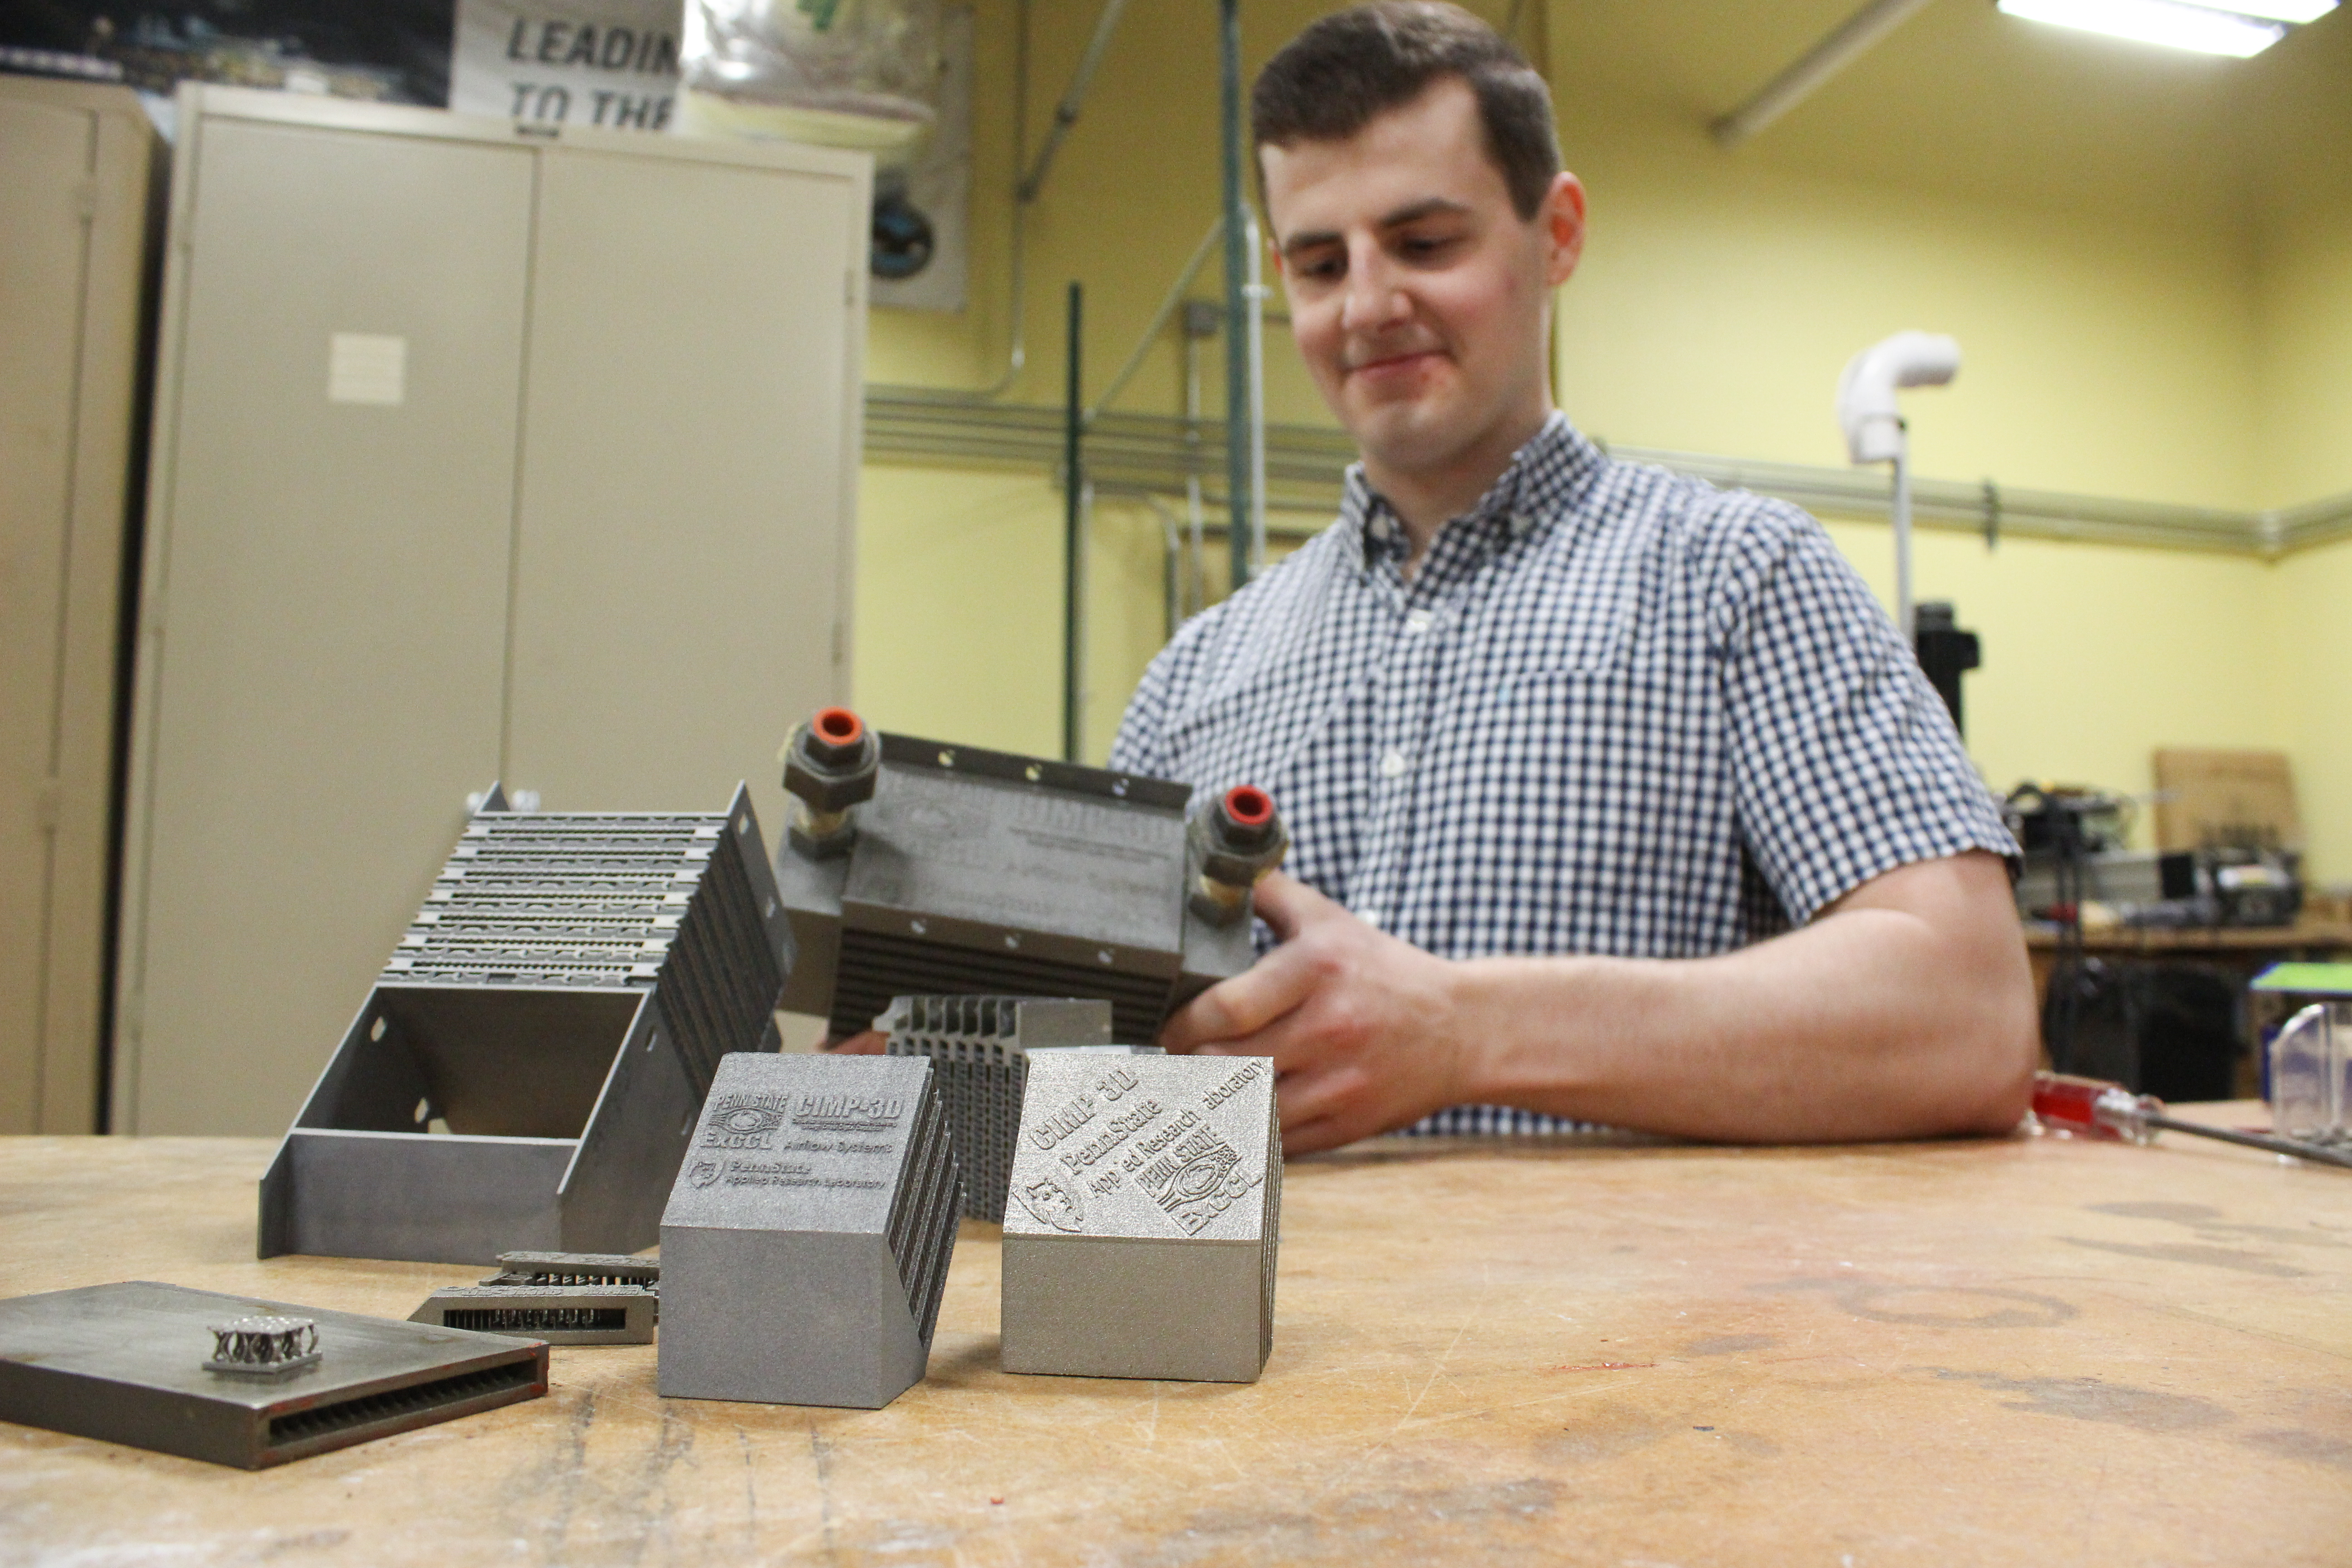 Michael Bichnevicius works with additive manufactured parts in the ExCCL Lab.